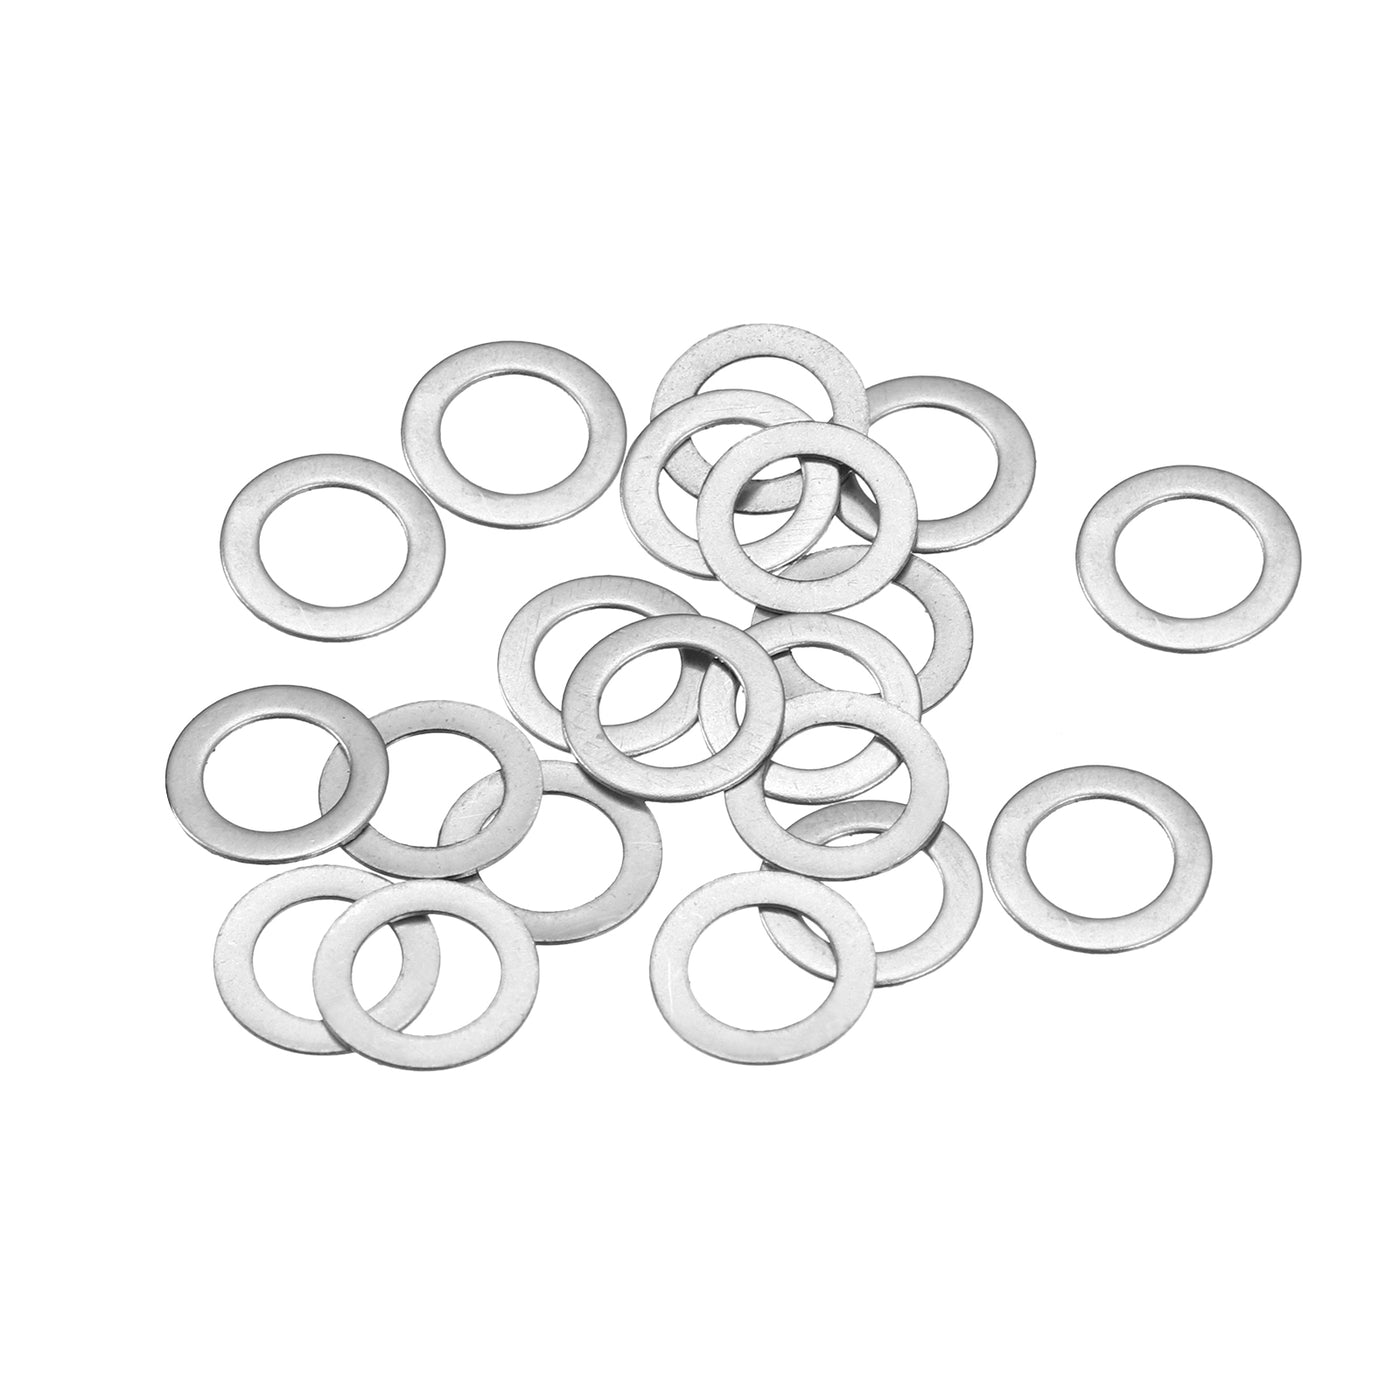 uxcell Uxcell M5 304 Stainless Steel Flat Washers, 20pcs 5x8x0.1mm Ultra Thin Flat Spacers